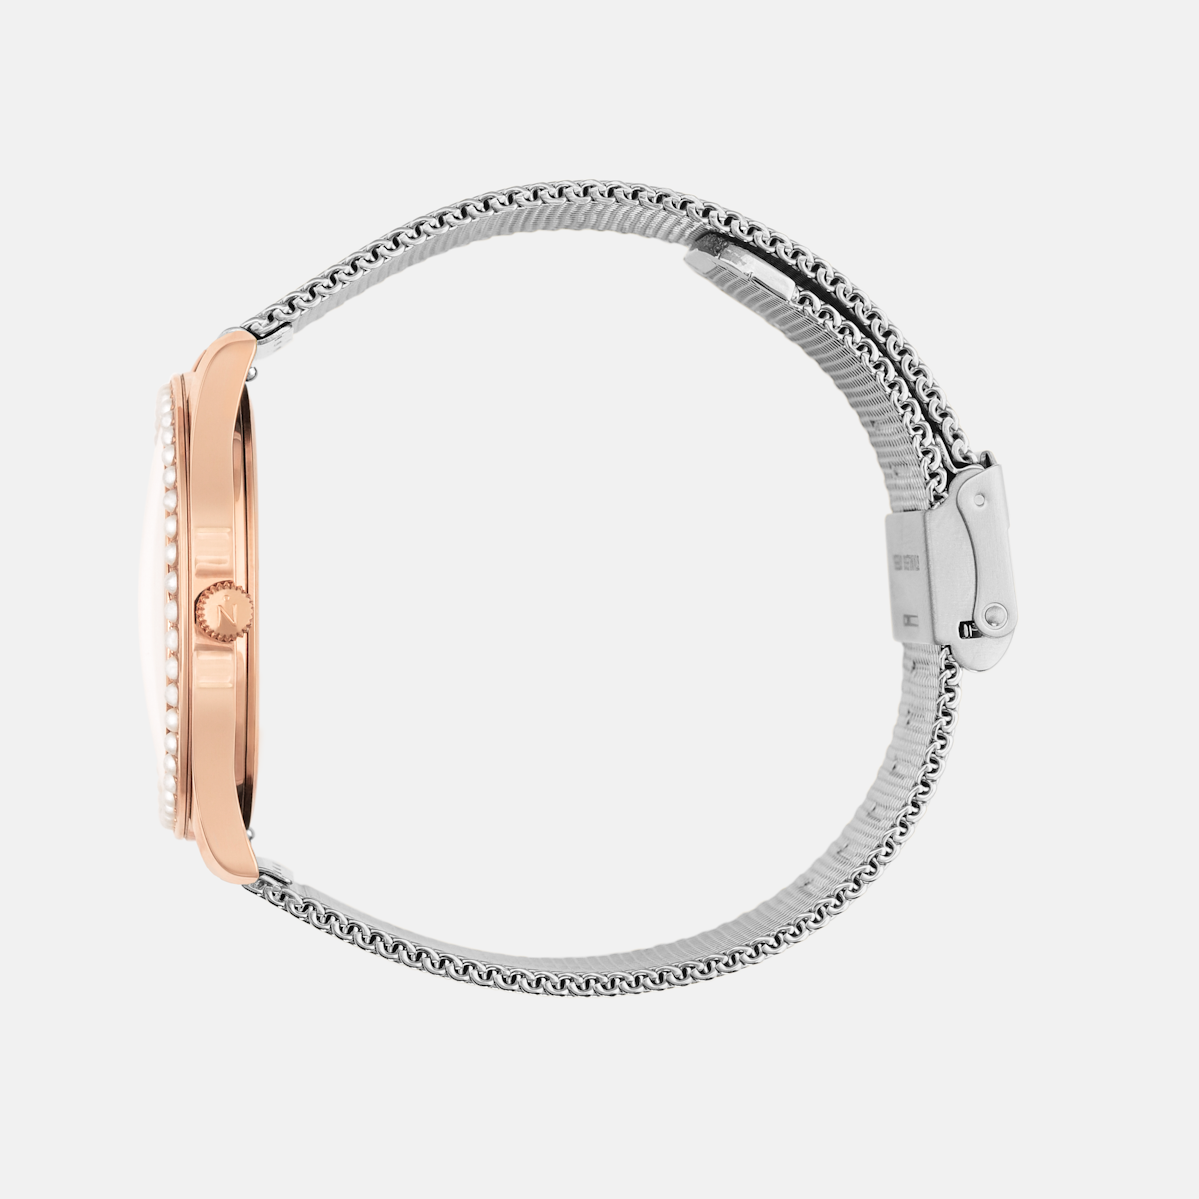 Lune 48 - Rose Gold - Stainless Steel Mesh